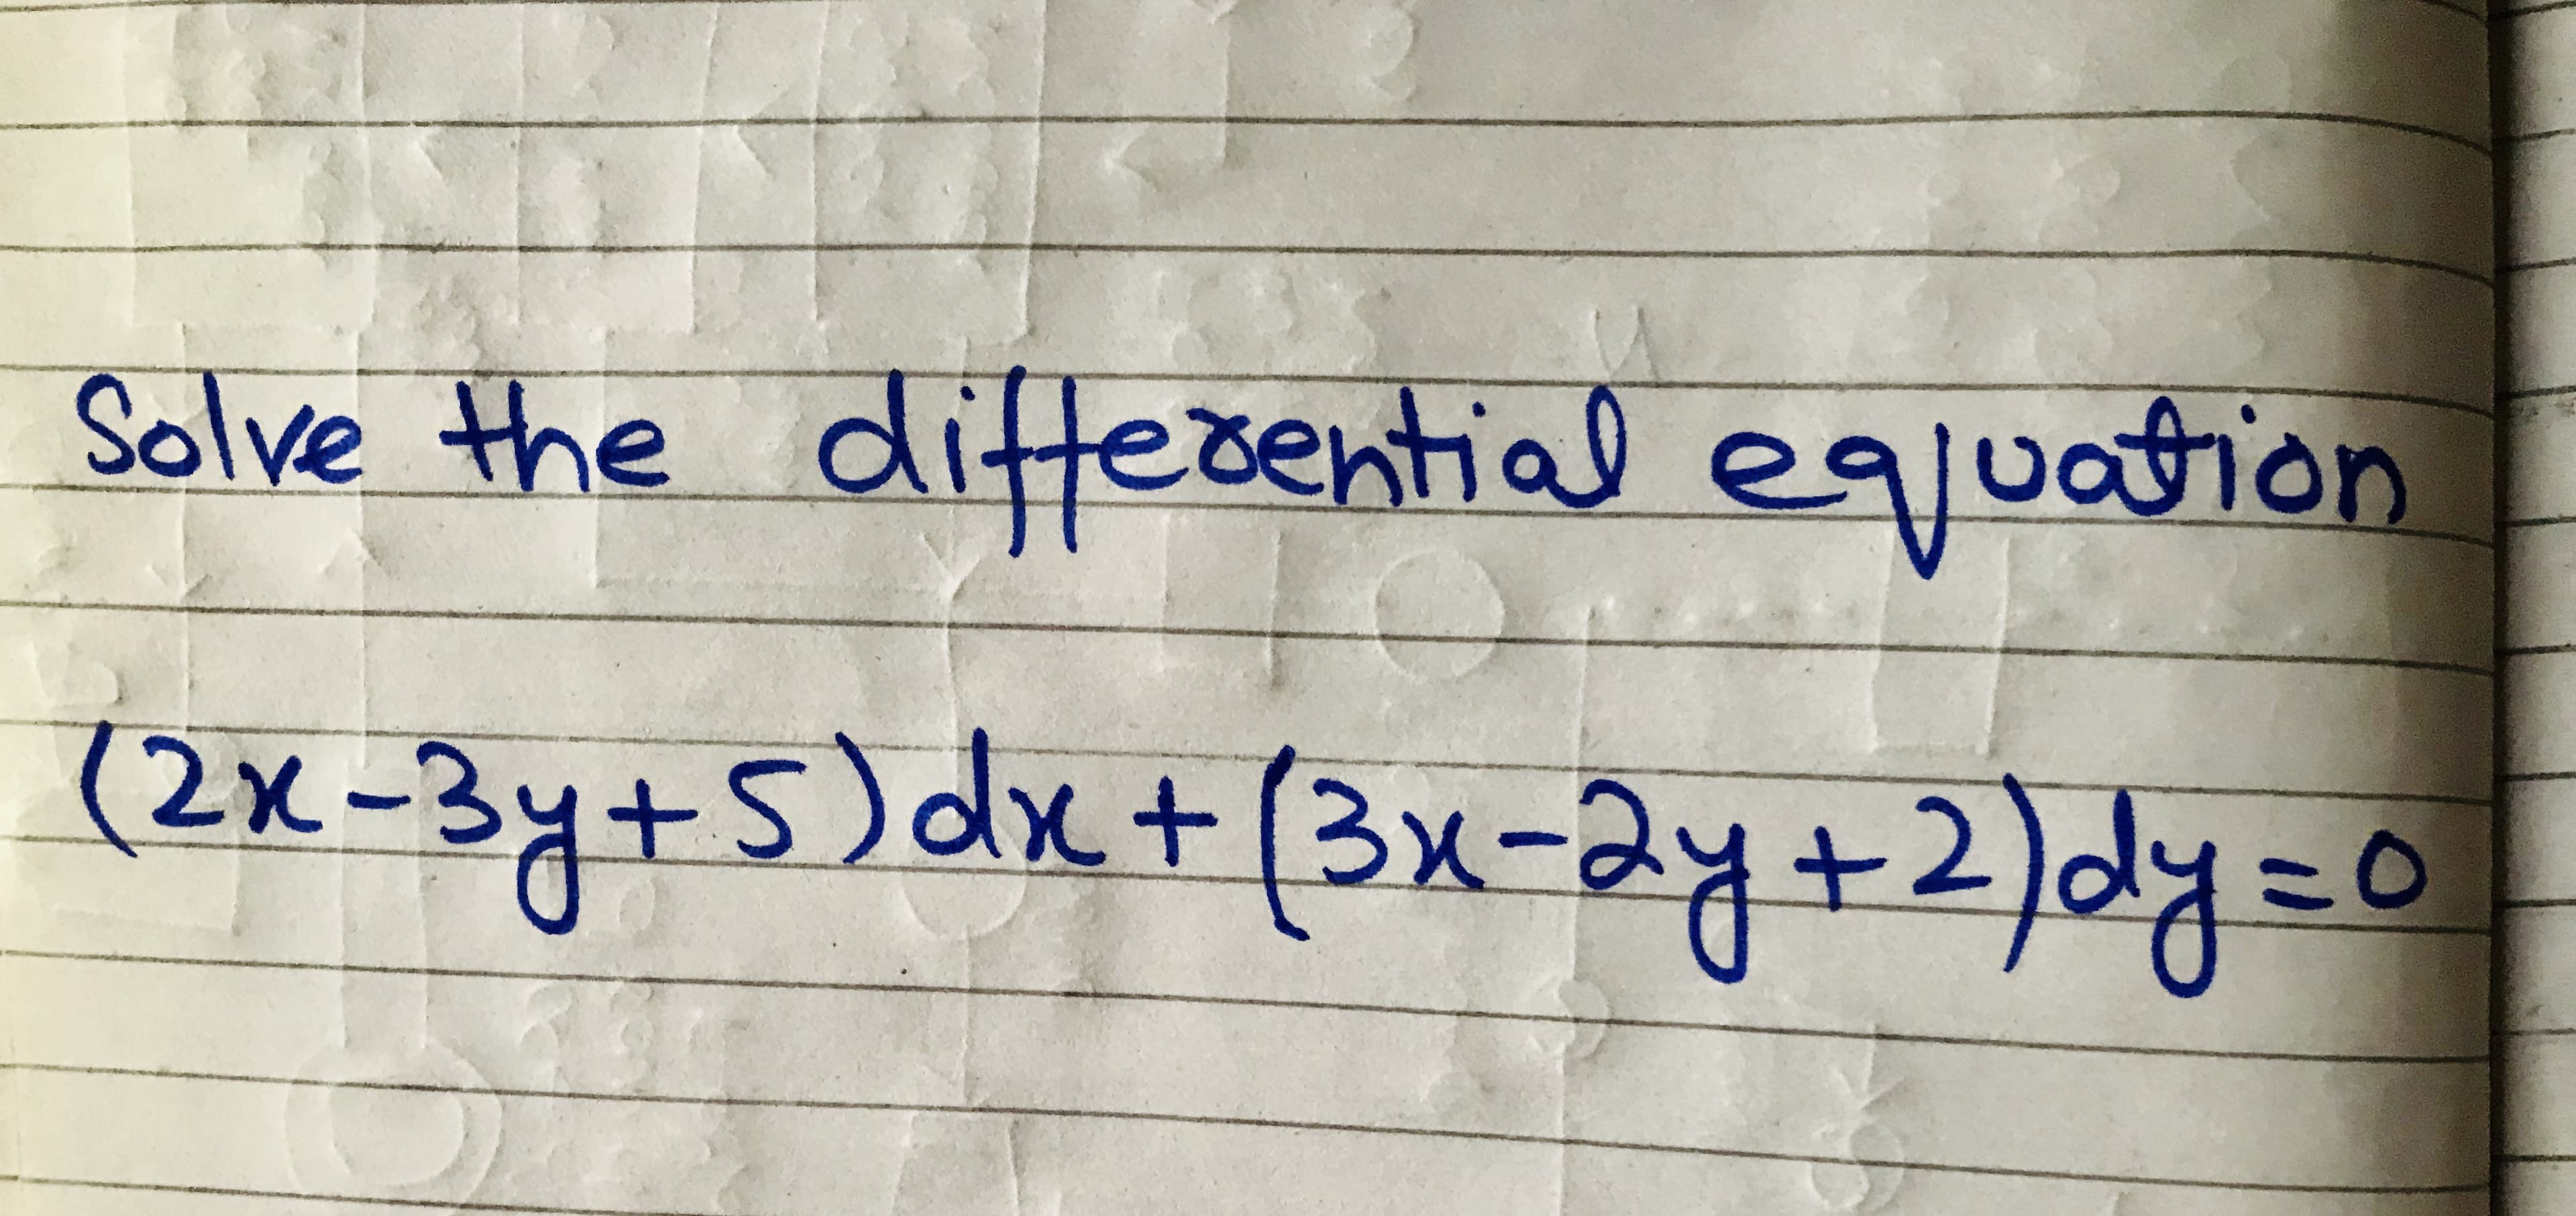 Solve the egjuation
ditferential
(2x-3y+5)dx+(3x-2y+2)dy=0
